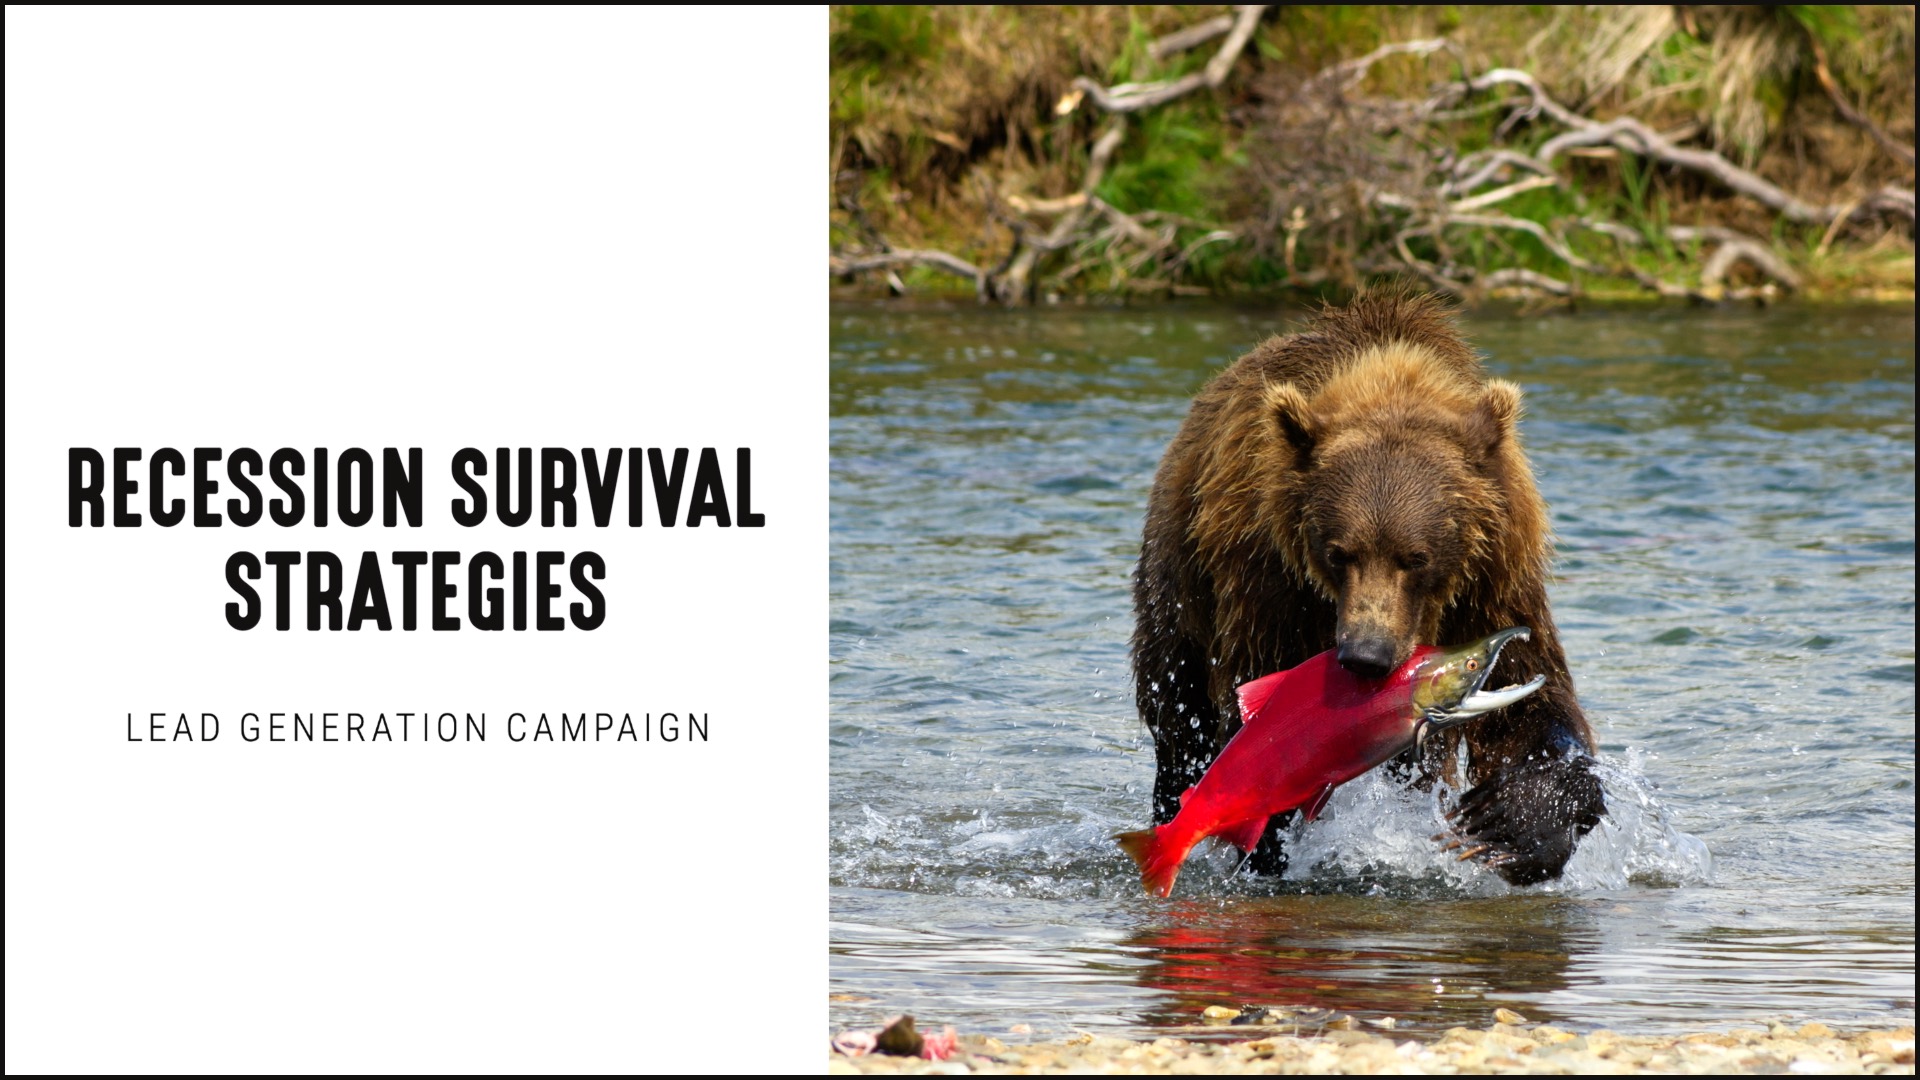 [NEW] Recession Survival Strategies - Lead Generation Campaign for Financial Advisors